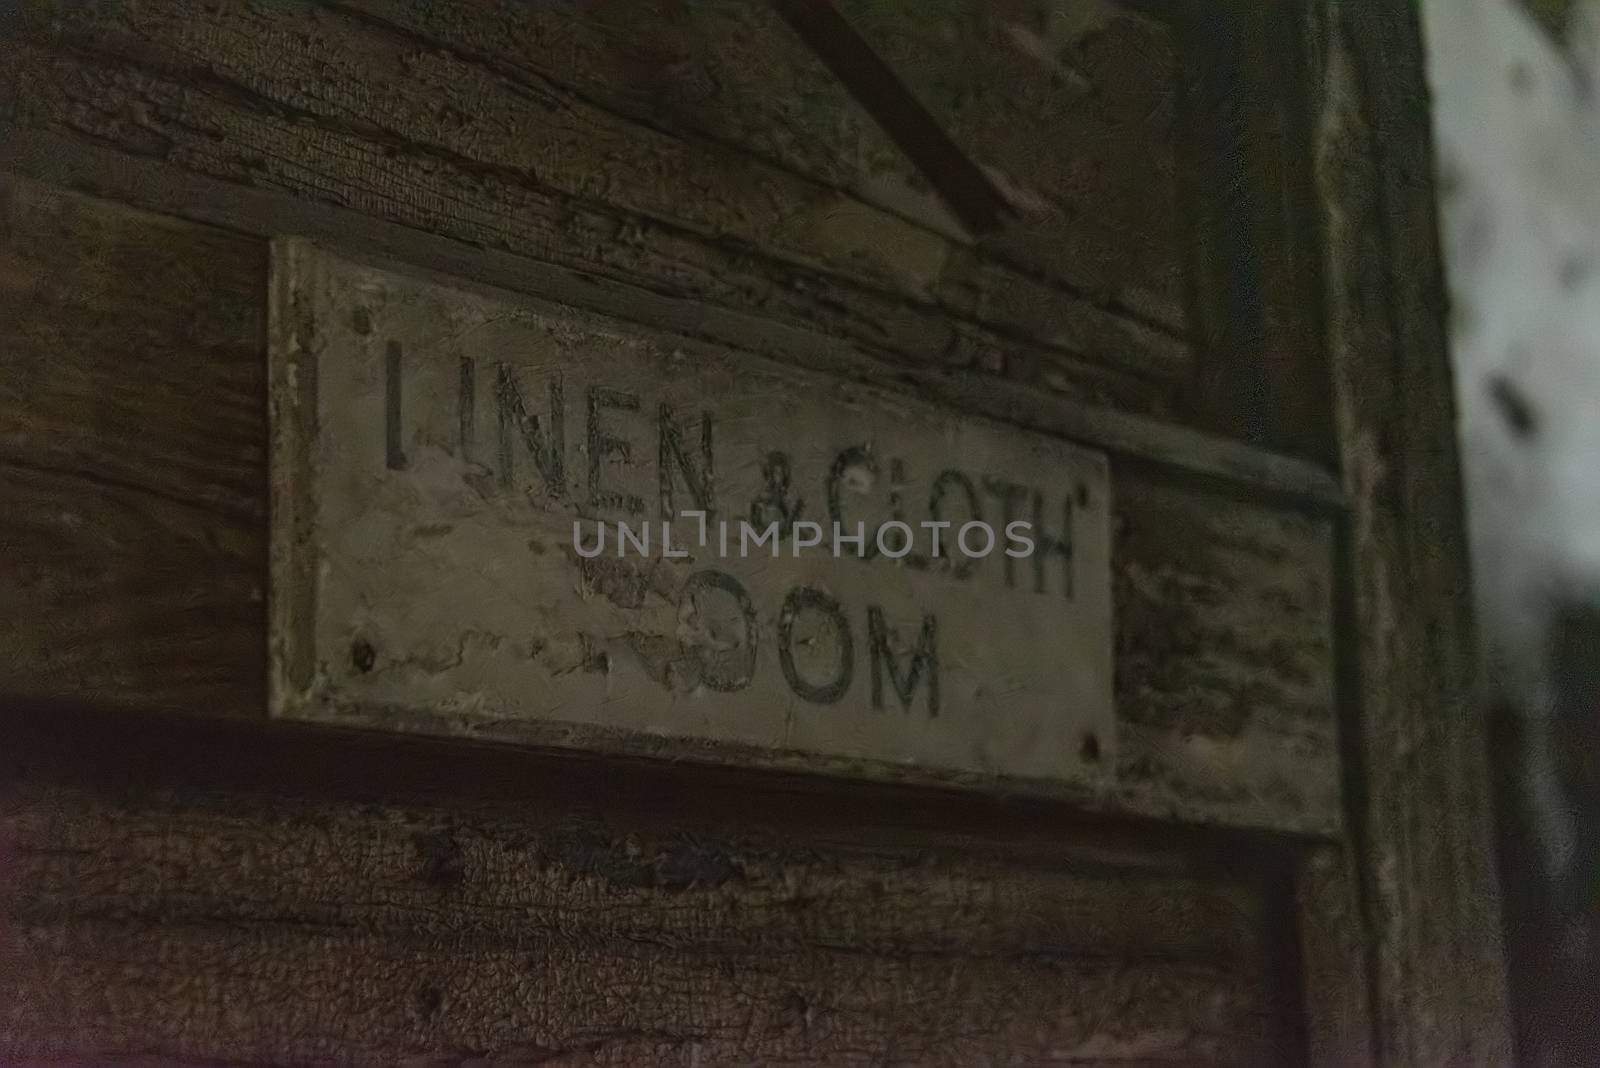 USA, New York, Ellis Island - May 2019: Decaying sign - Linen and cloth room' in an abandoned hospital